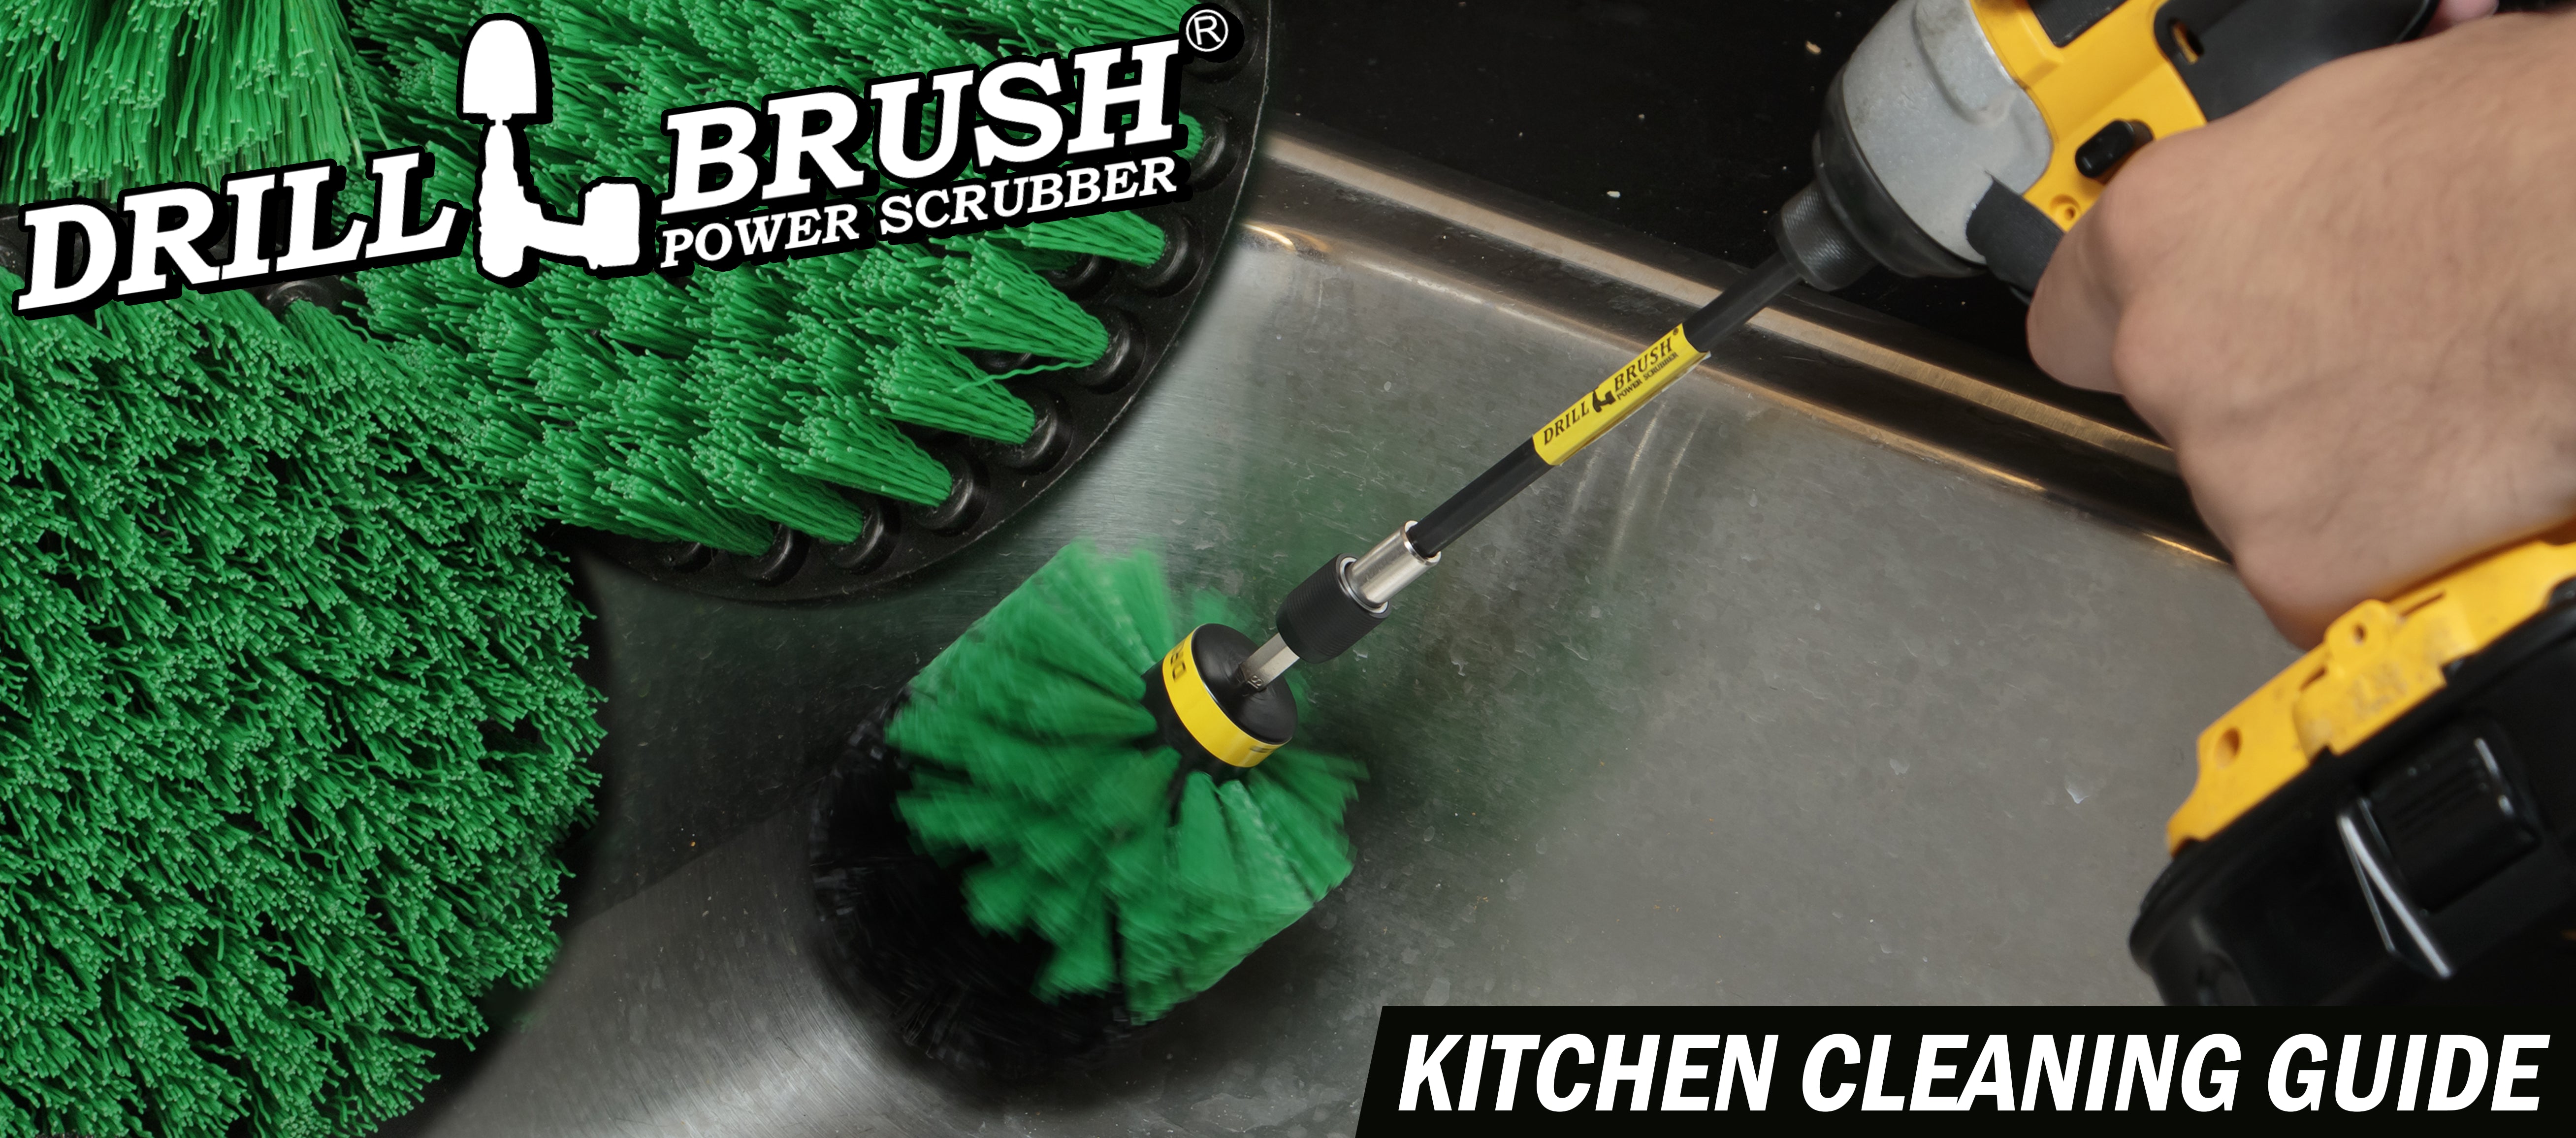 Kitchen Cleaning Tools: Make dishwashing a less painful experience